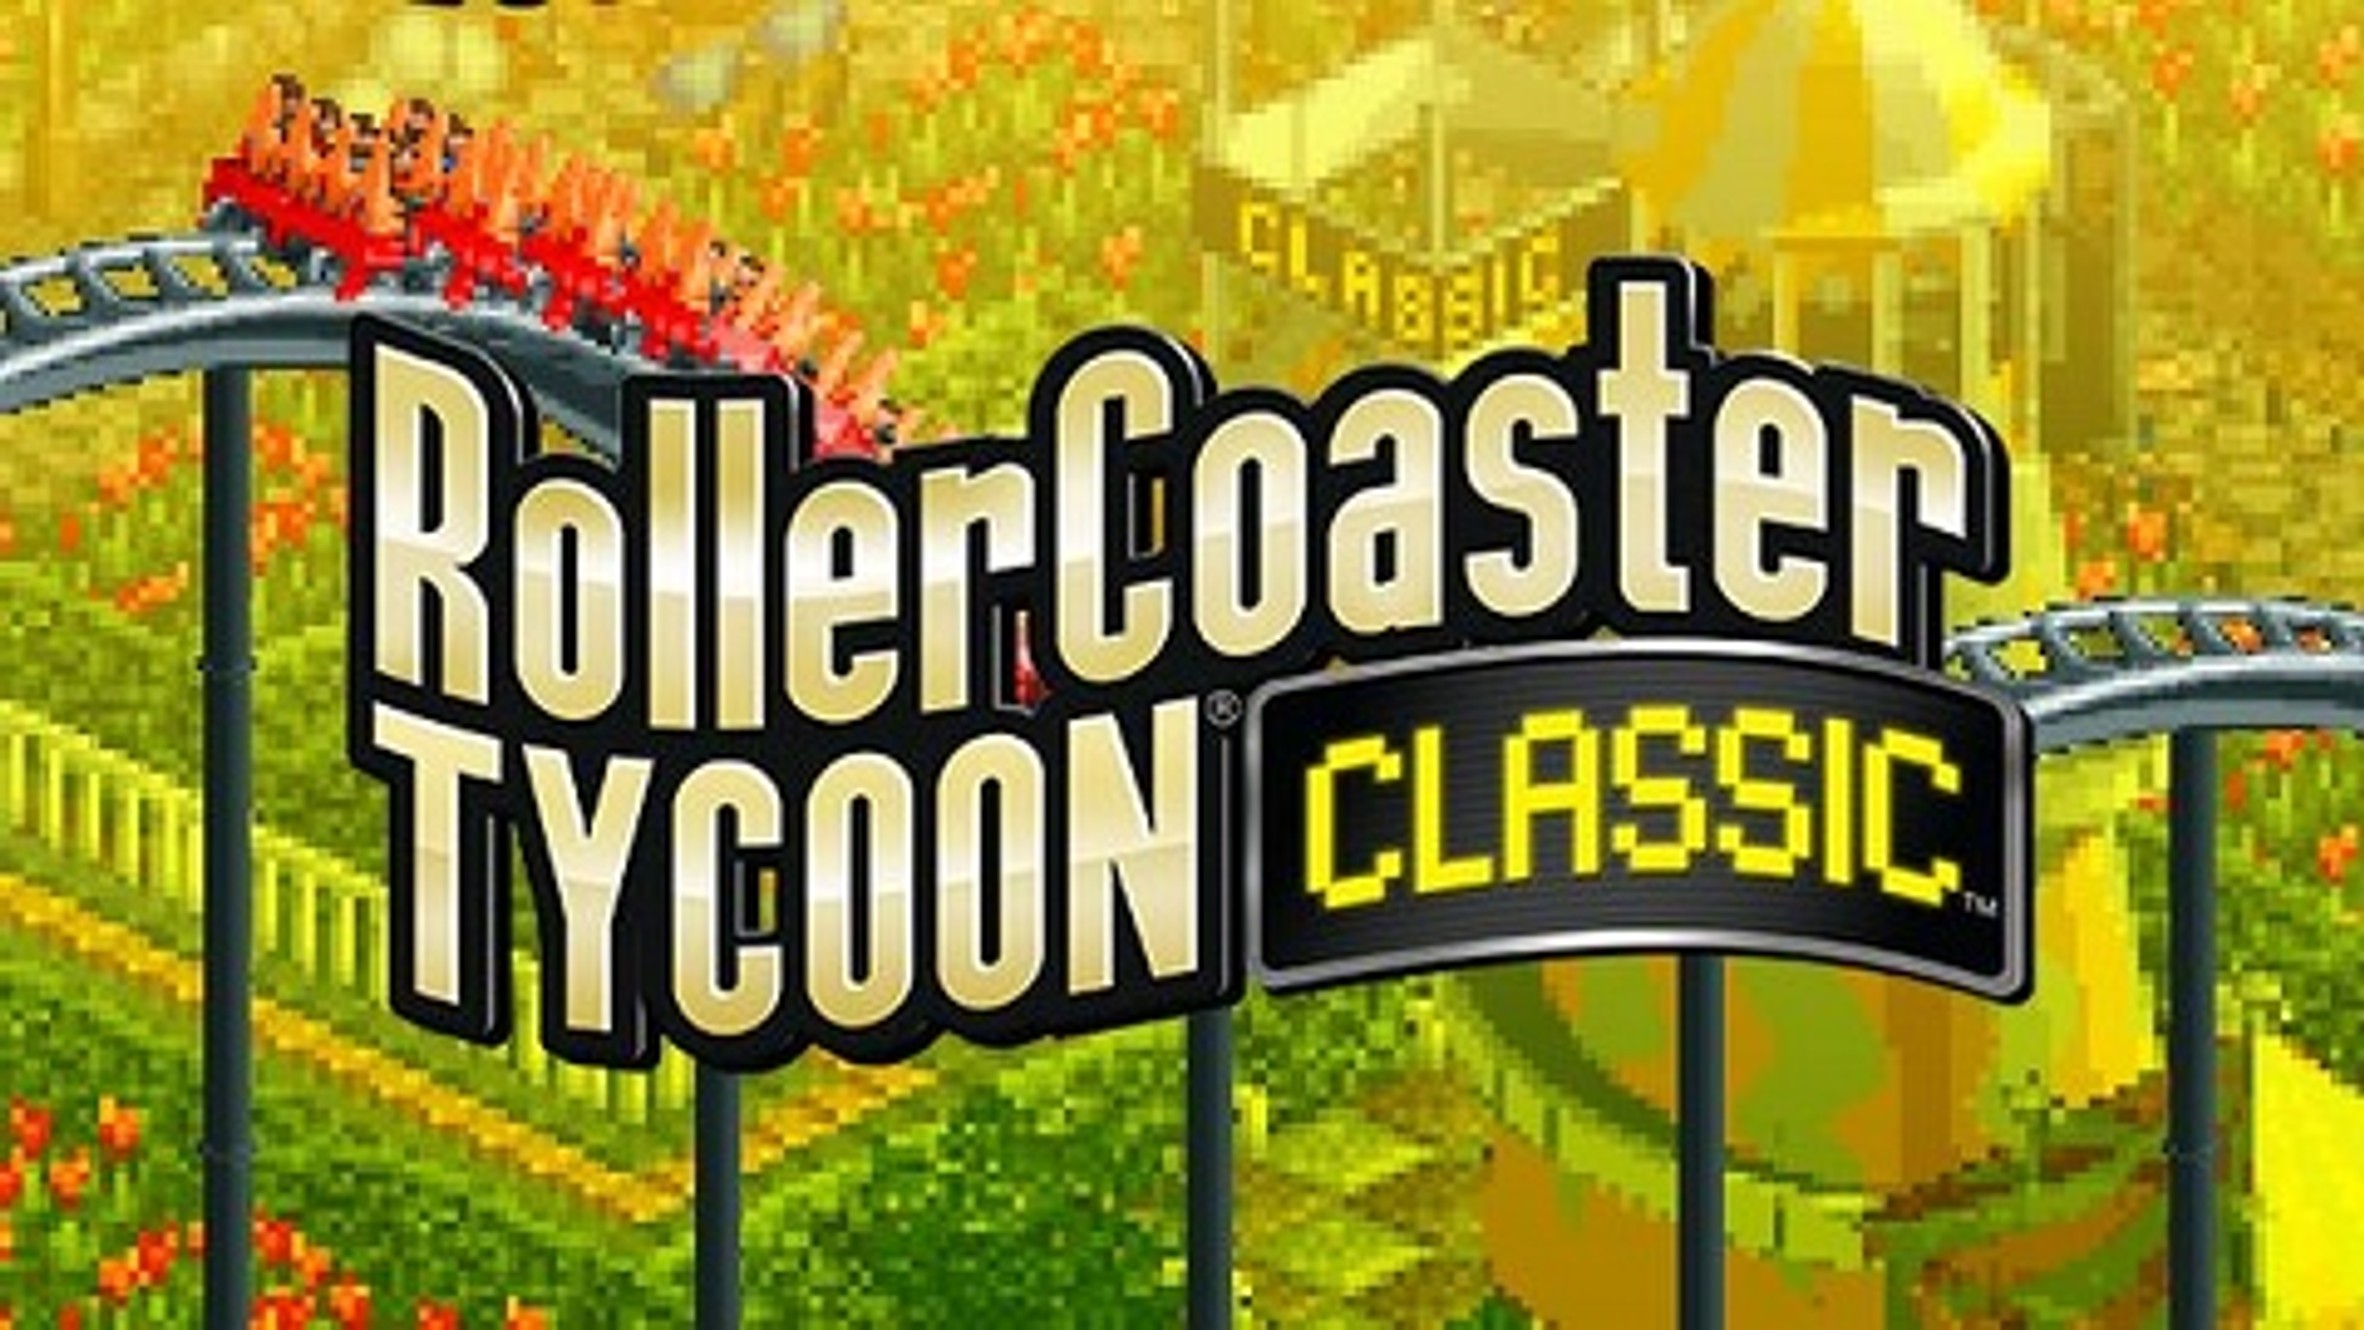 Roller coaster tycoon - propjes